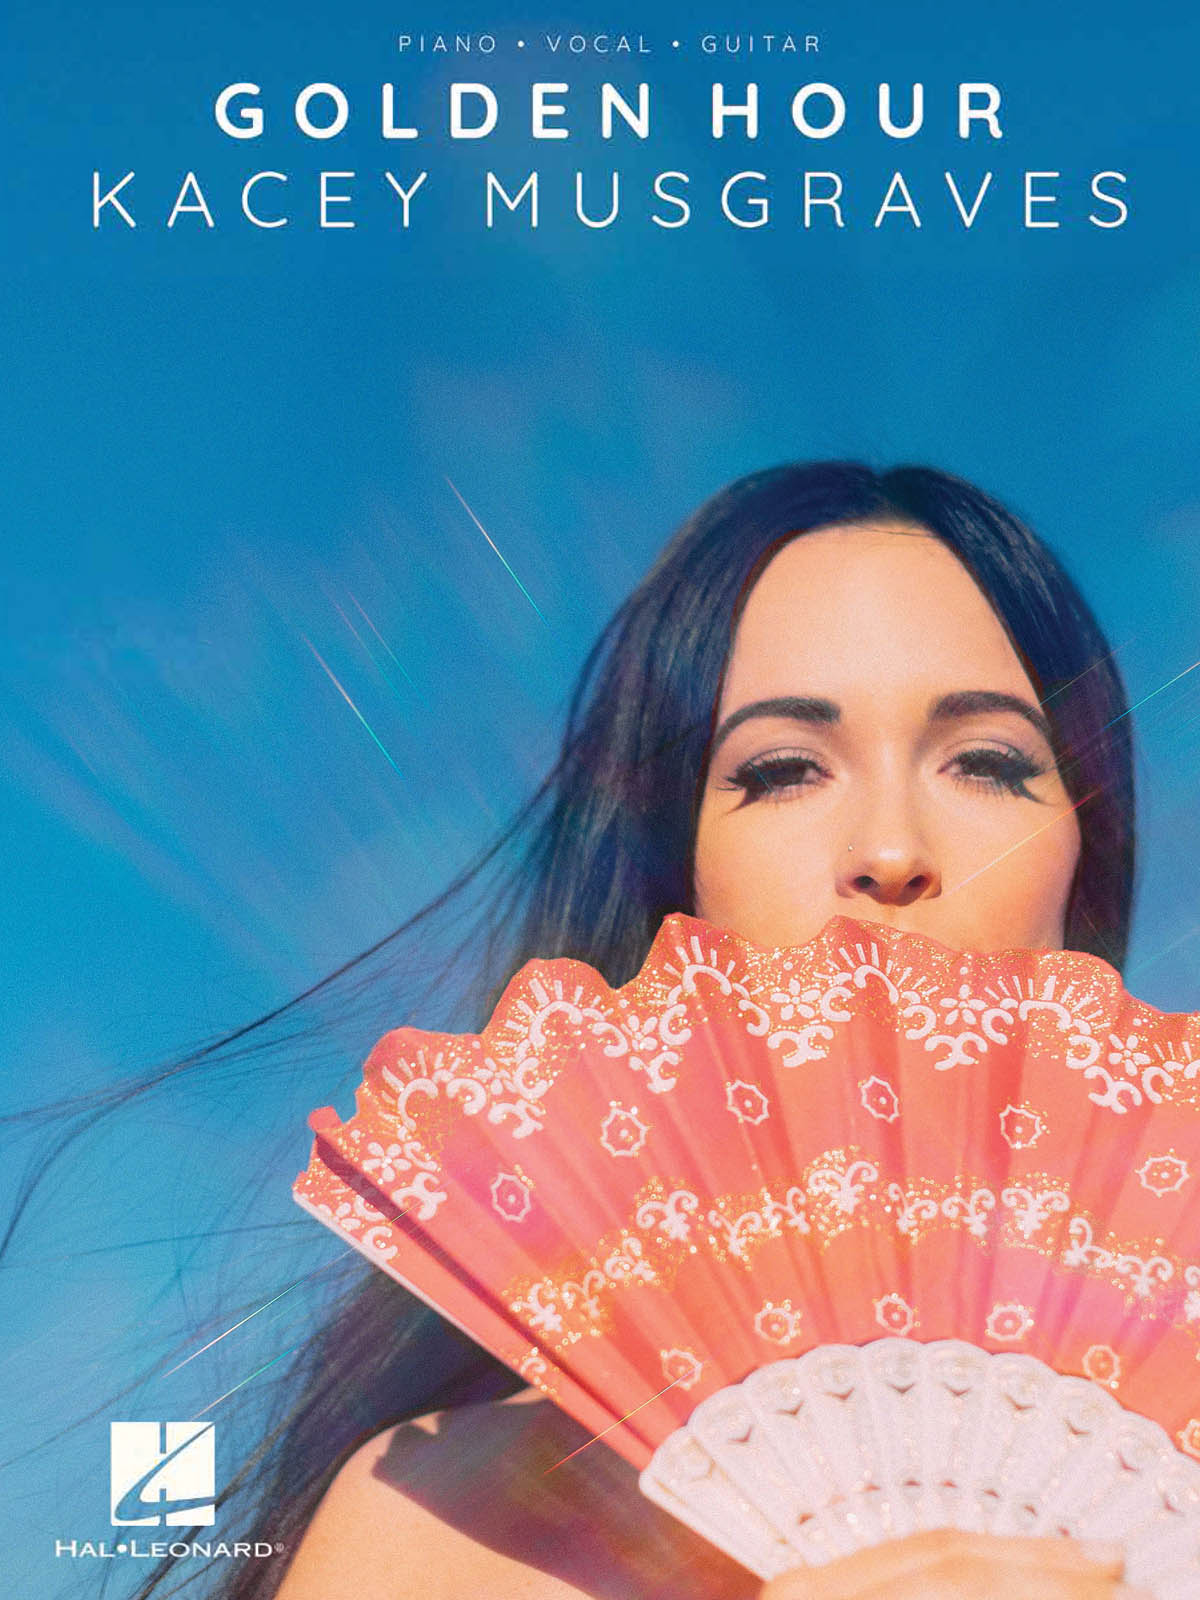 Kacey Musgraves: Kacey Musgraves - Golden Hour: Piano  Vocal and Guitar: Vocal